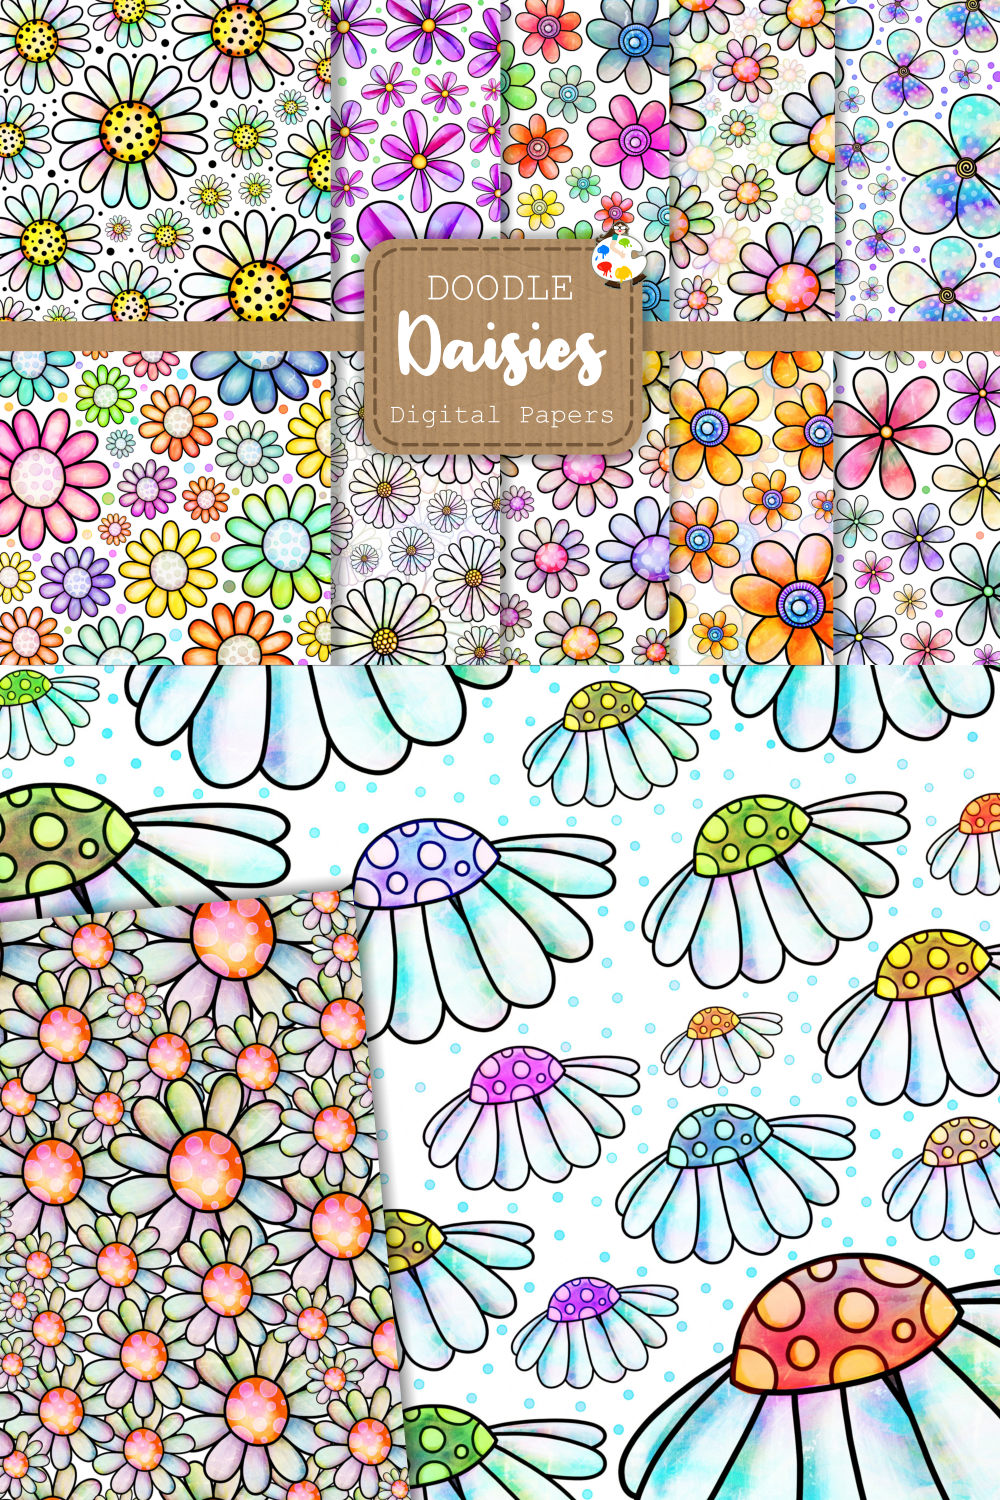 Watercolor Ink Doodle Daisy Flower Pattern Papers pinterest image.